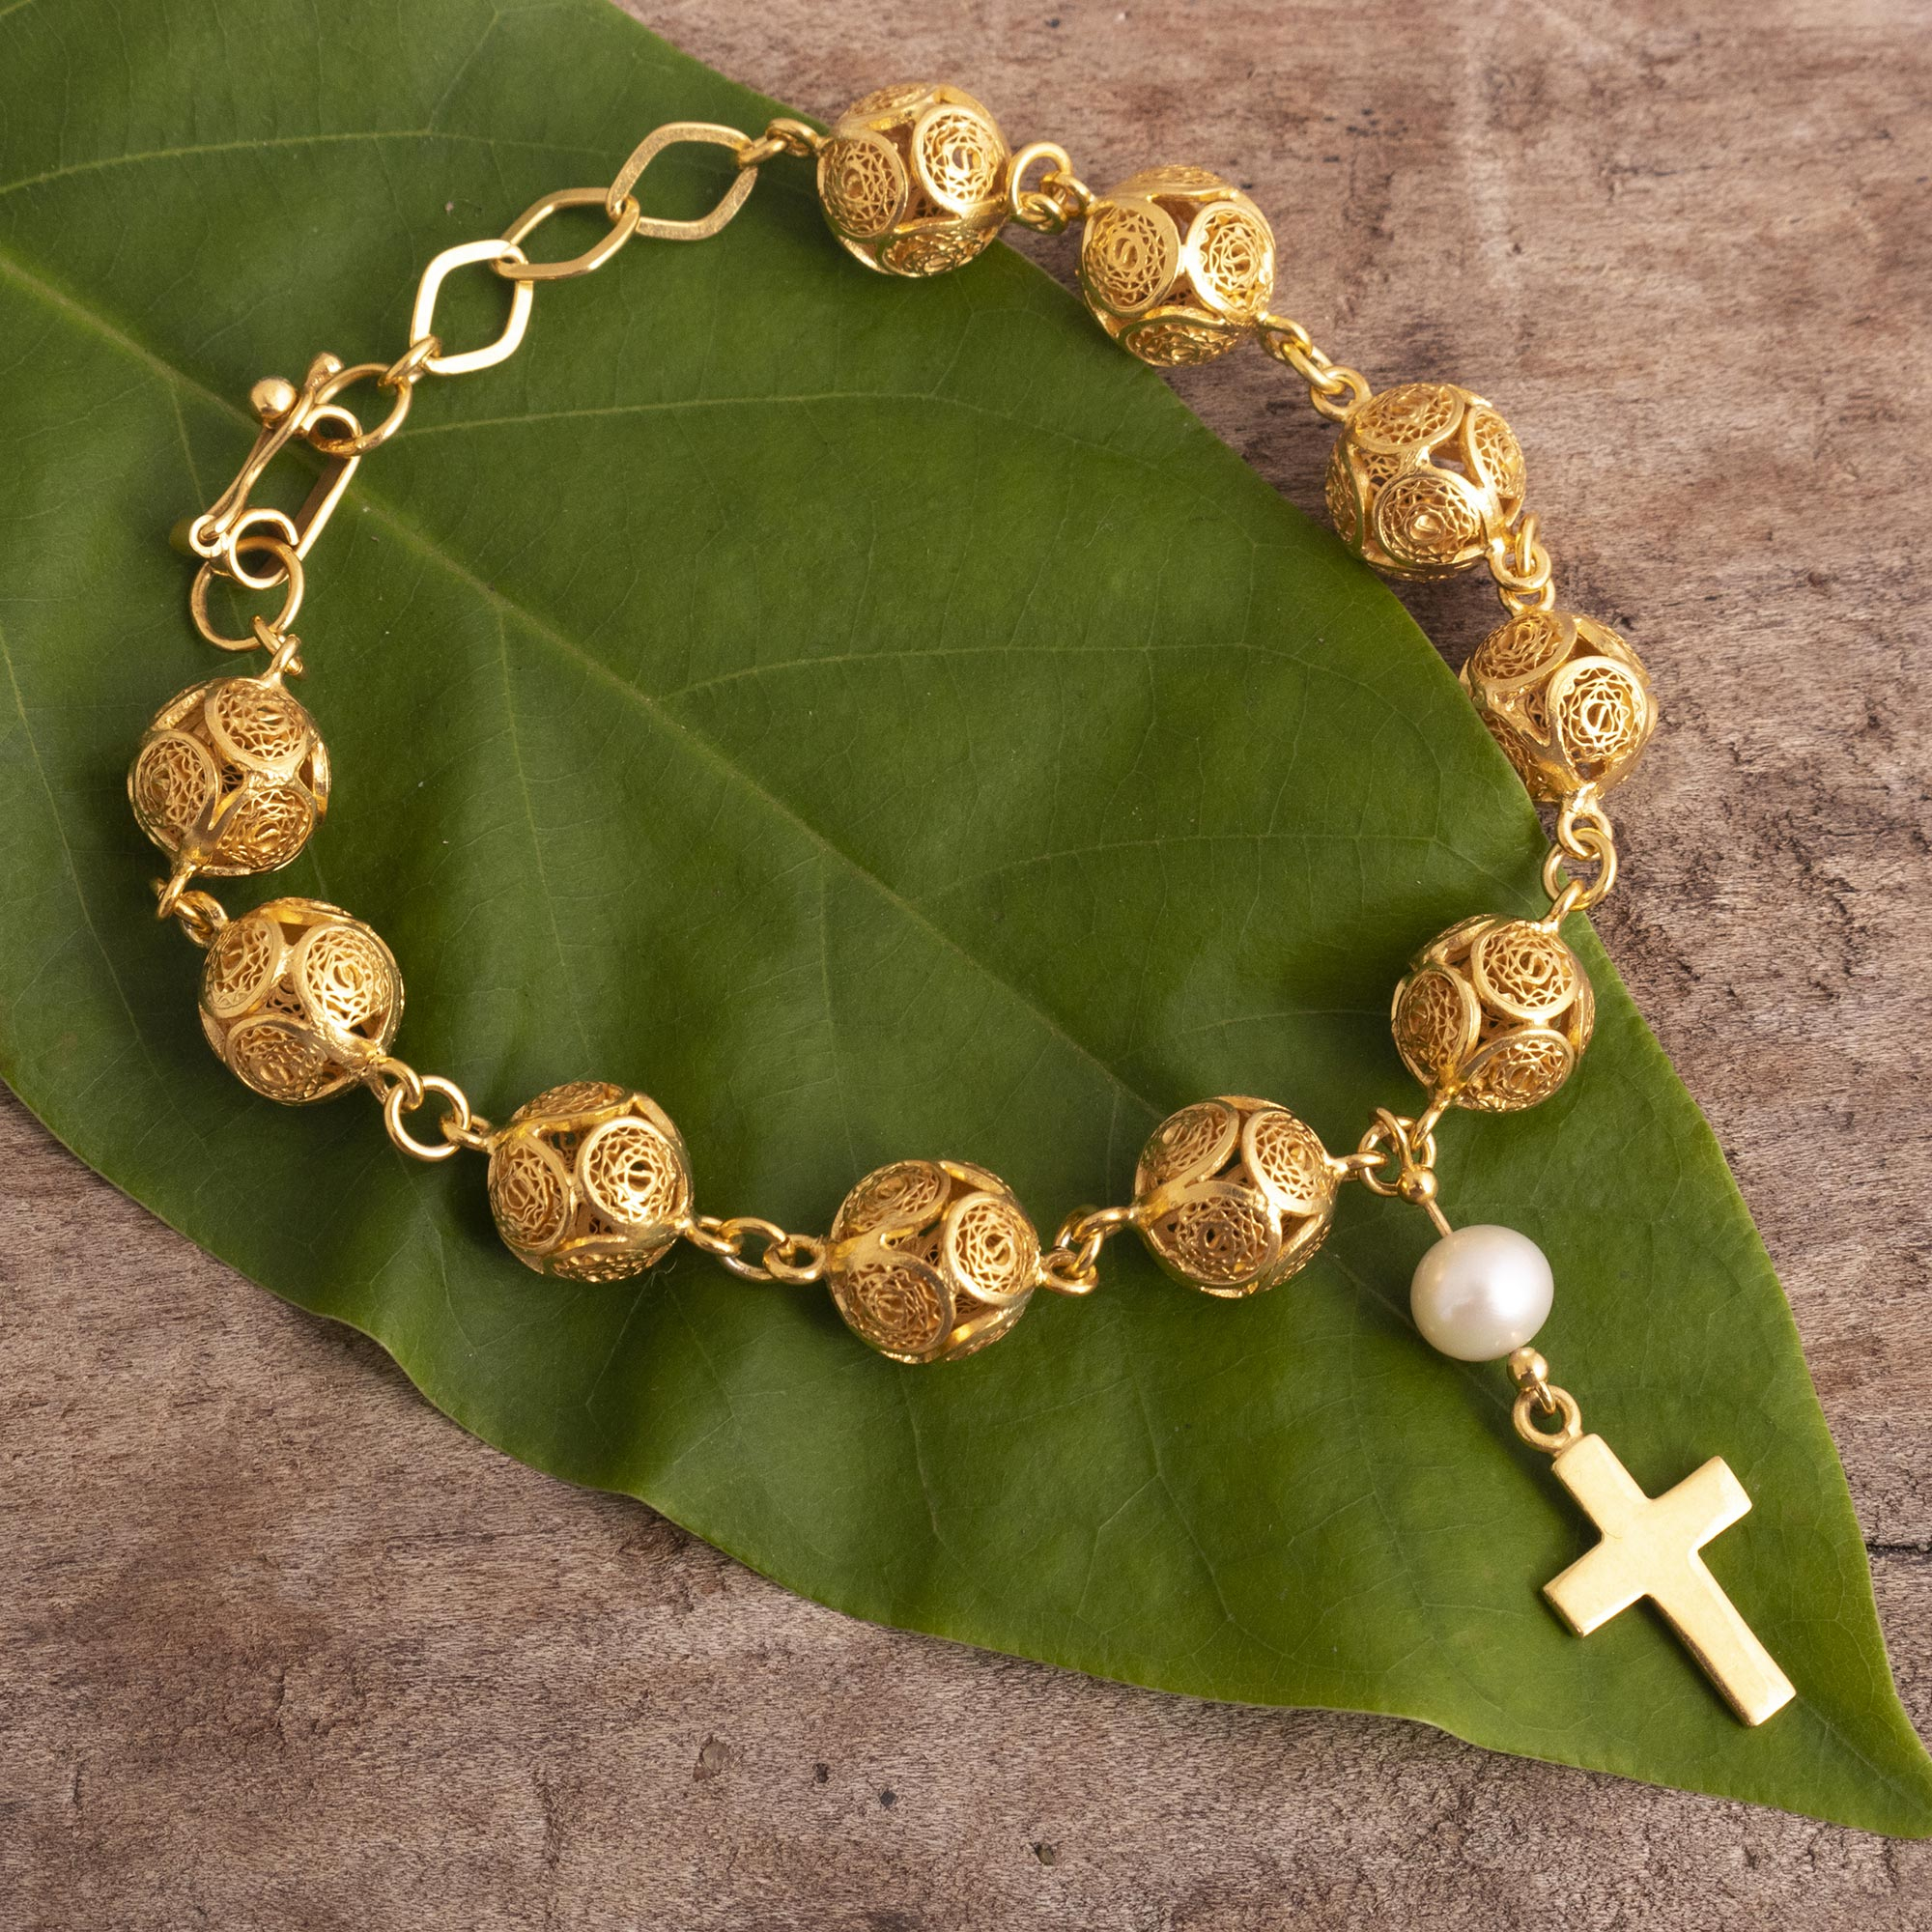 February Rosary Bracelet | Handmade | Our Lady of Grace Rosaries